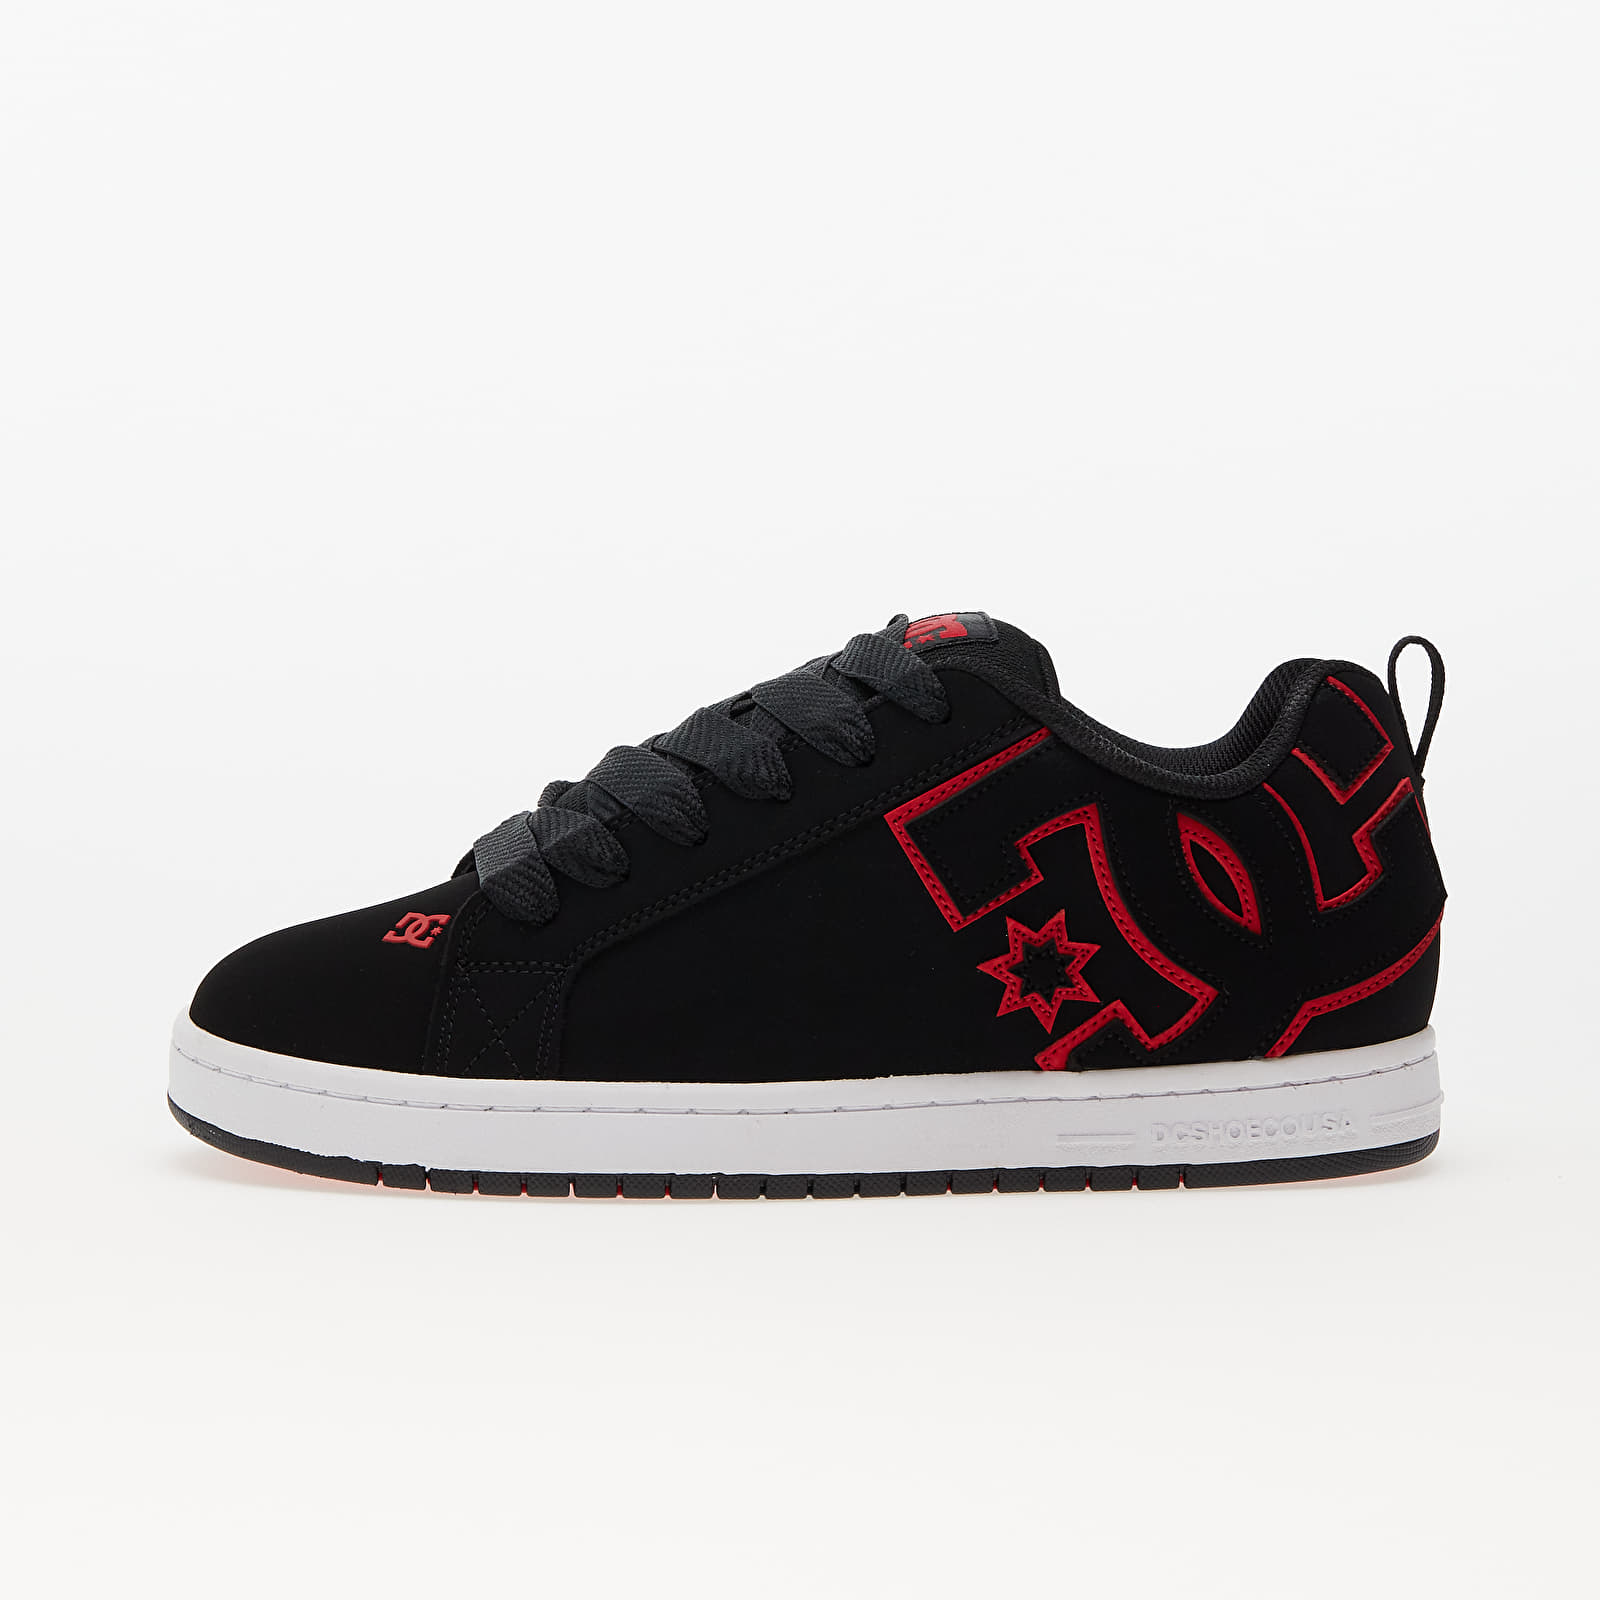 Men's sneakers and shoes DC Court Graffik Black/ Red/ White